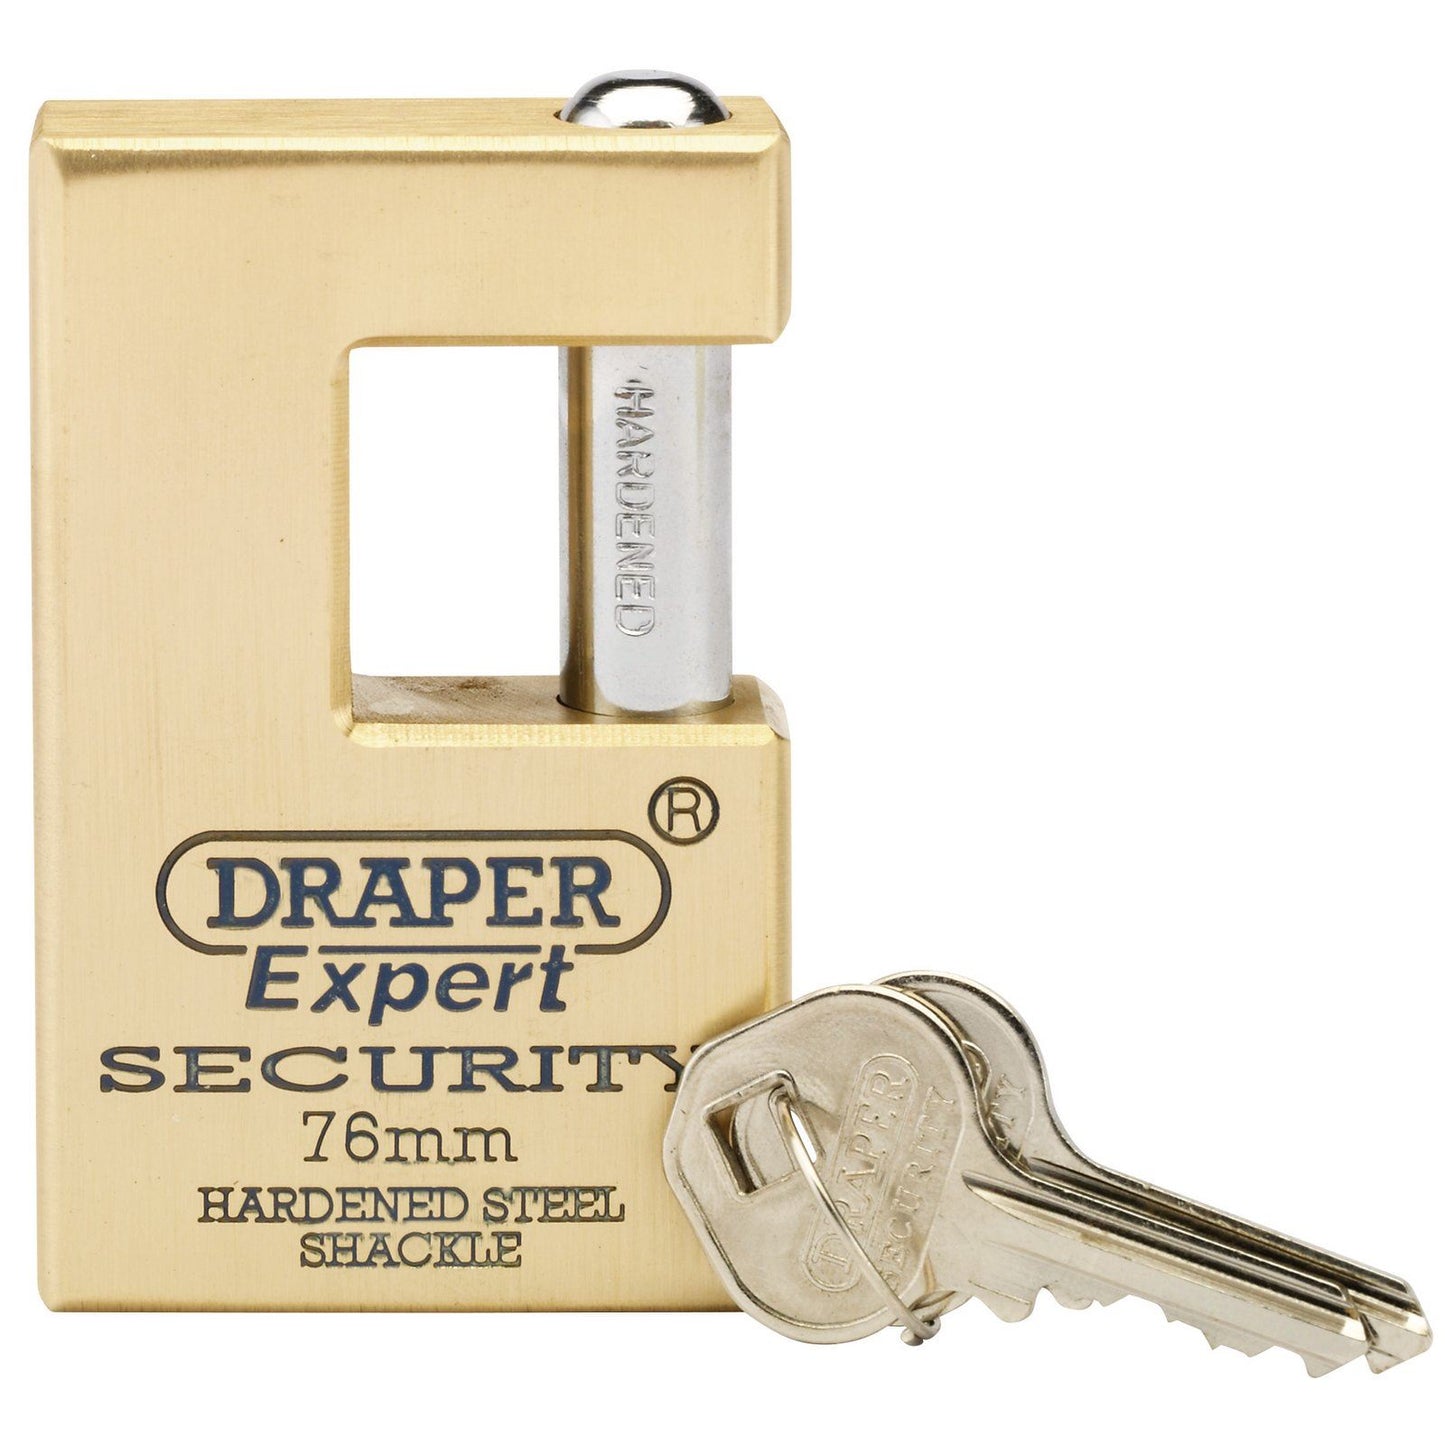 Draper Expert 76mm Quality Close Shackle Solid Brass Padlock and 2 Keys with Har - 64202